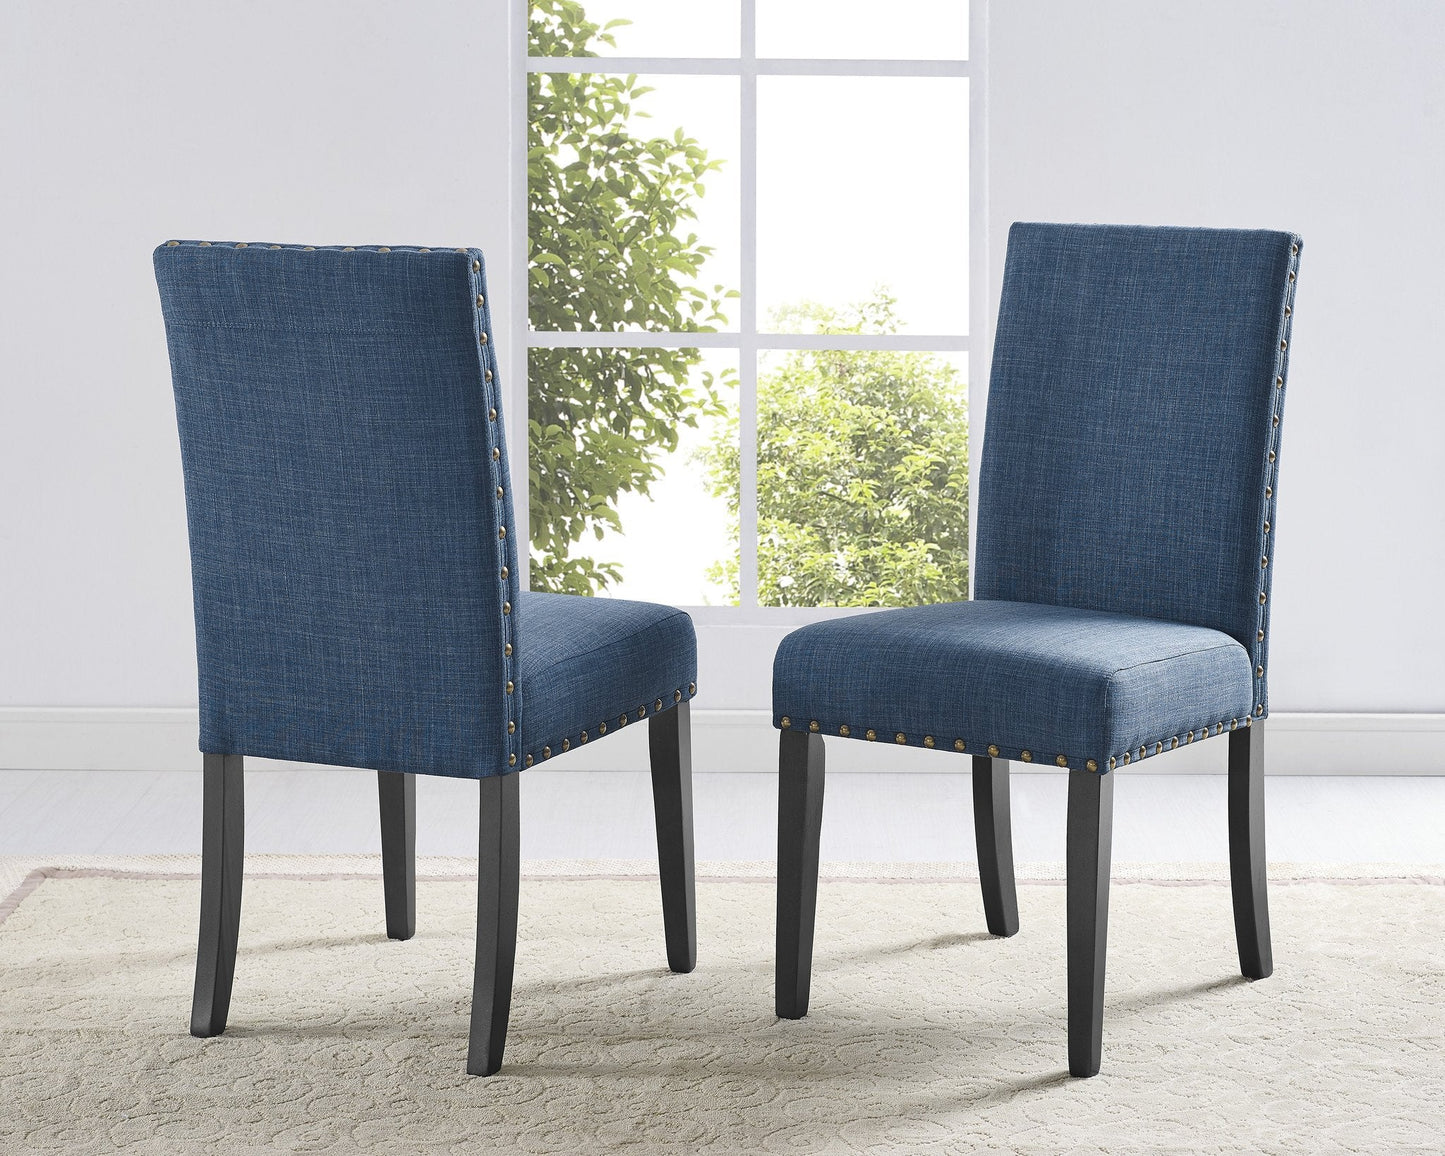 Biony Espresso Wood Dining Set with Blue Fabric Nailhead Chairs